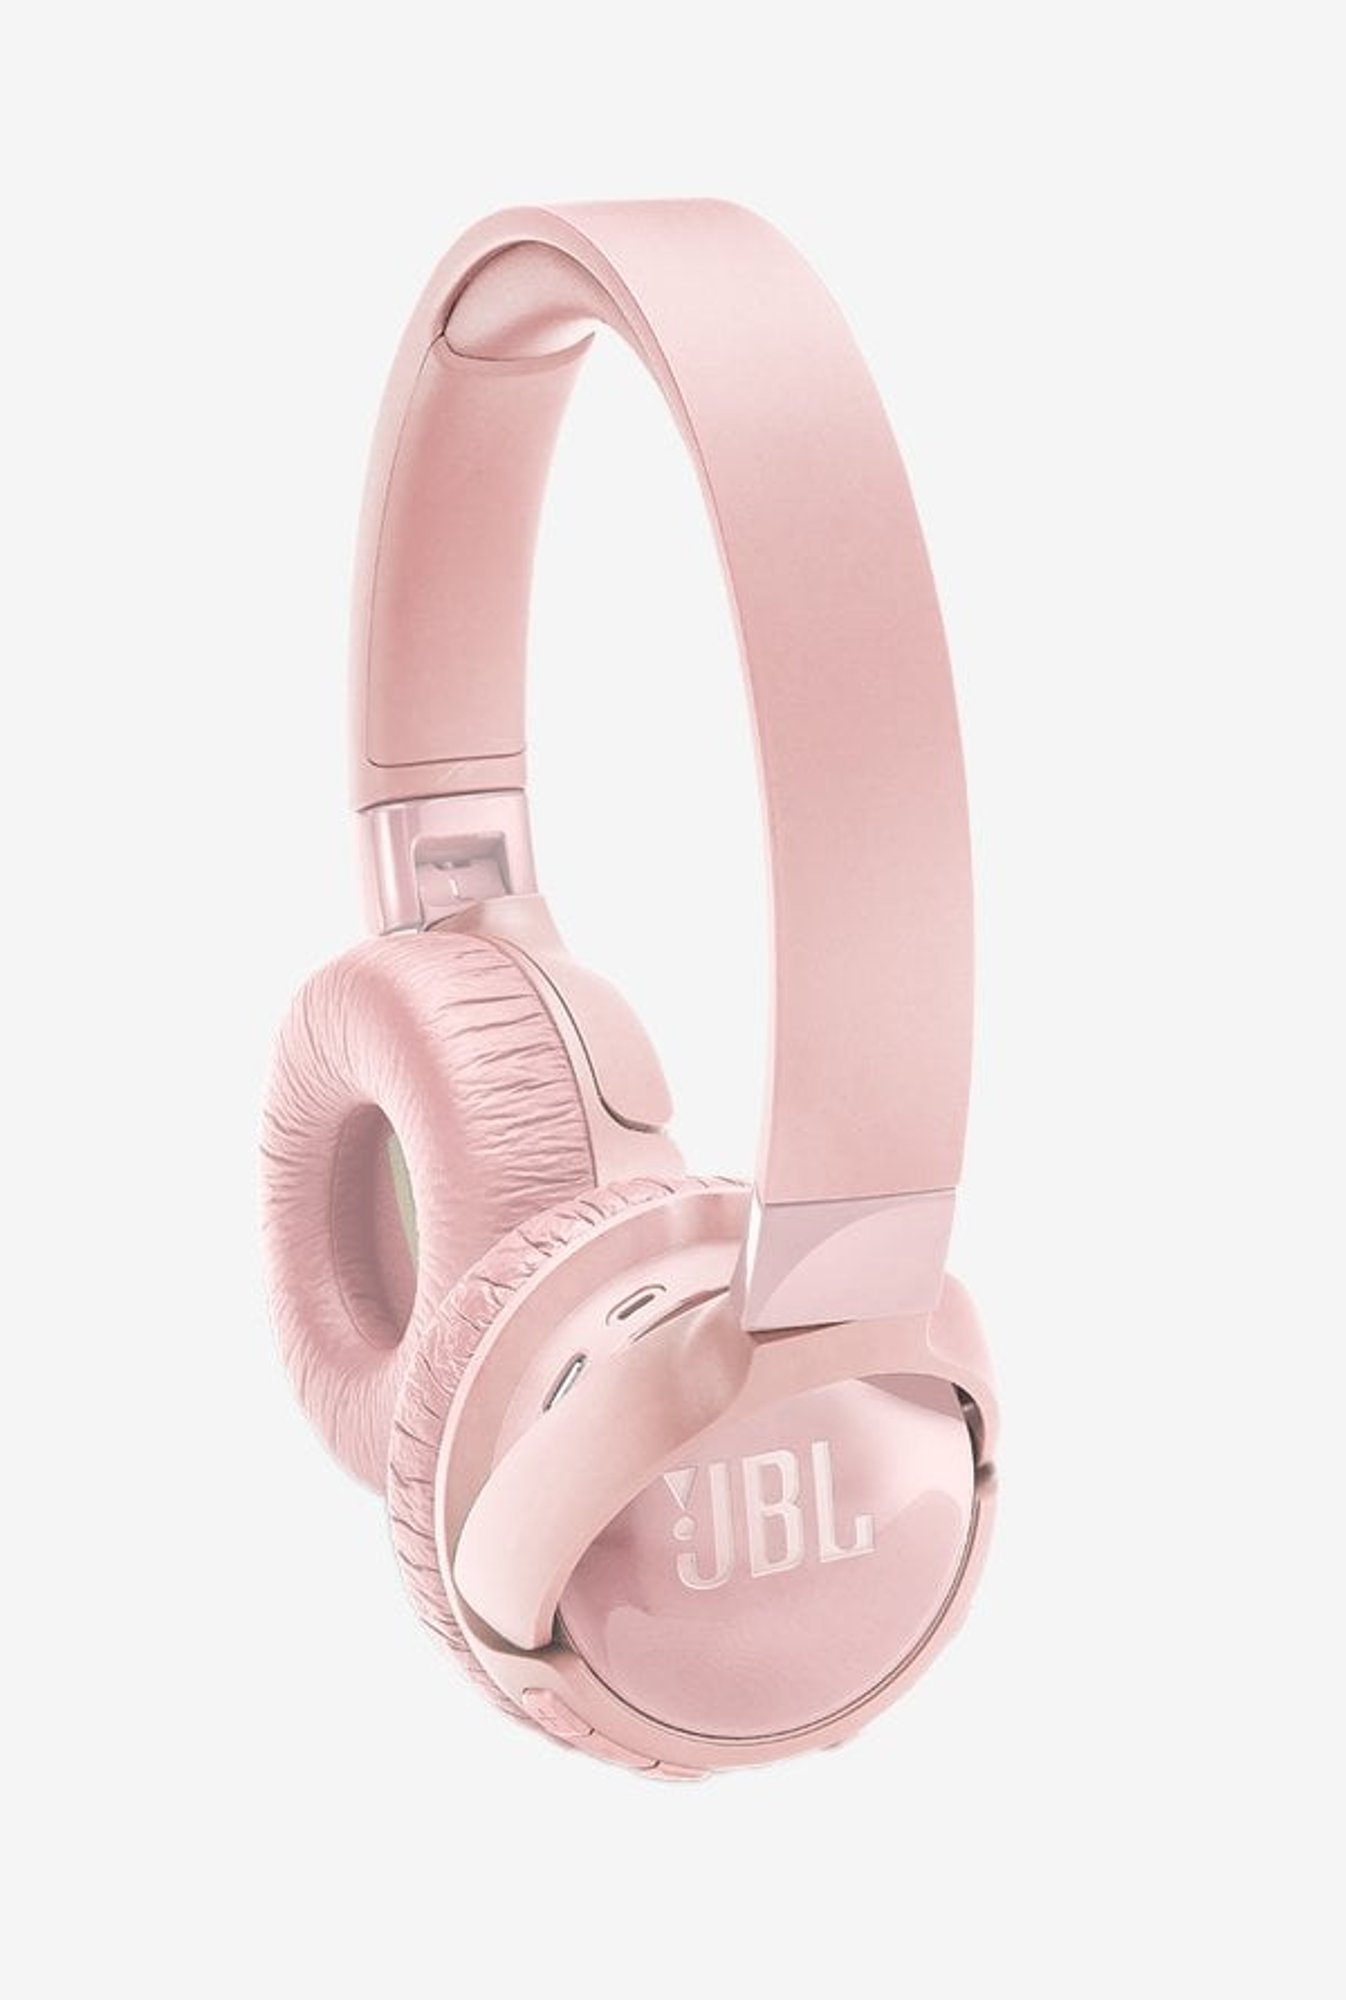 JBL Tune 710BT - Wireless Headphones Bundle with Deluxe CCI Carrying Case  (Blush Pink)